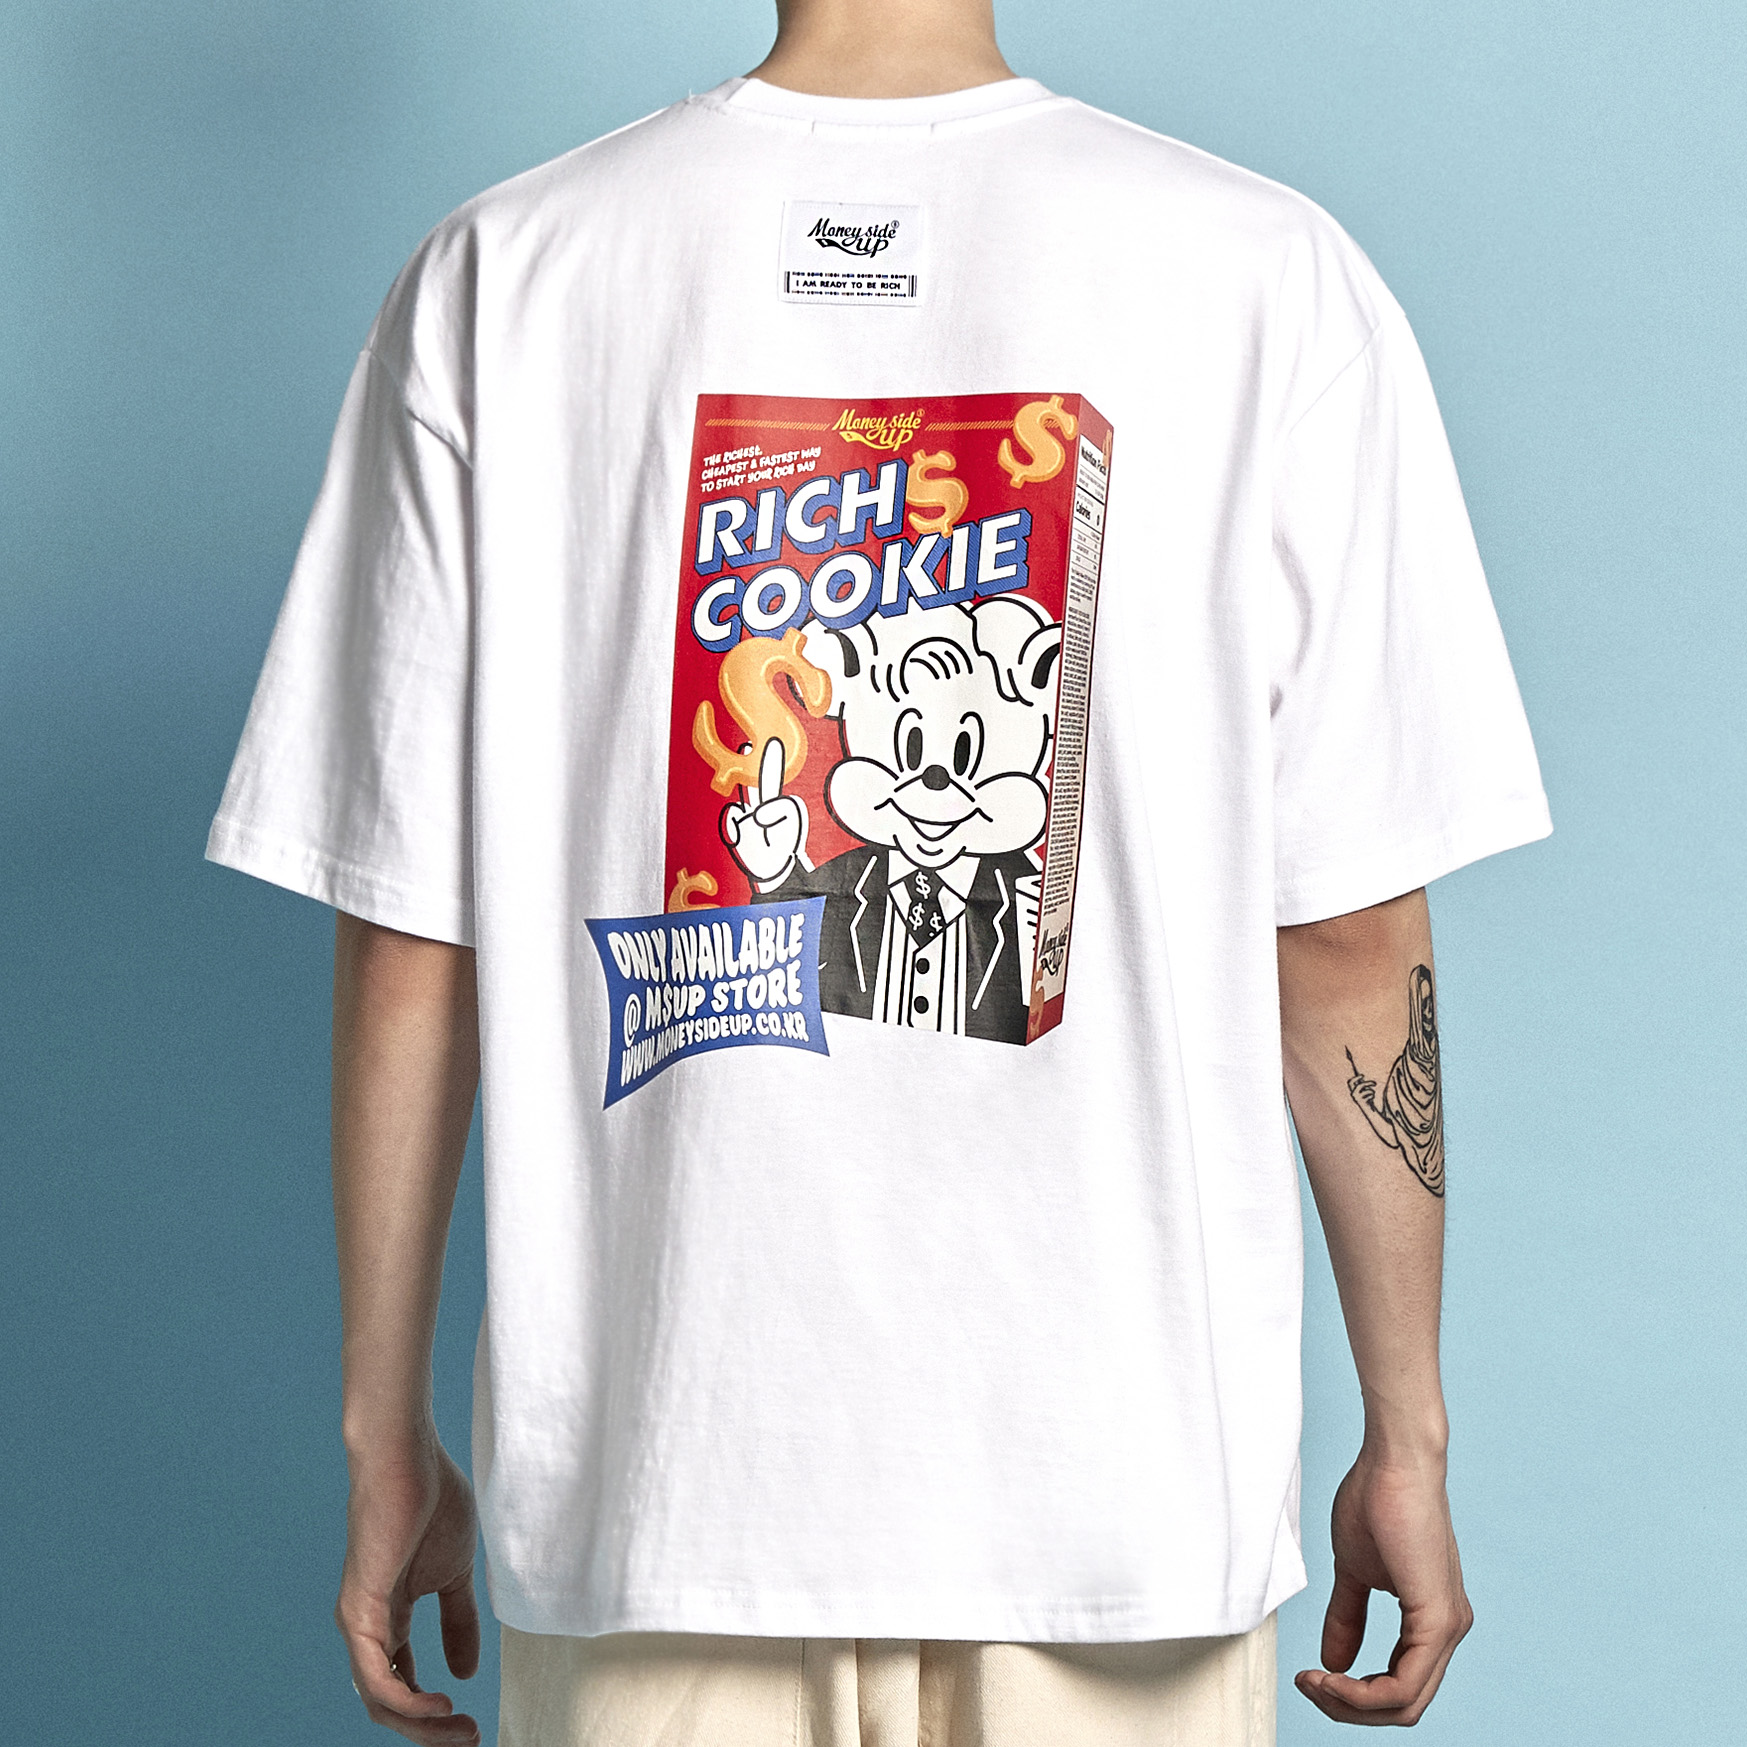 RICH COOKIE T-SHIRTS [10% OFF]